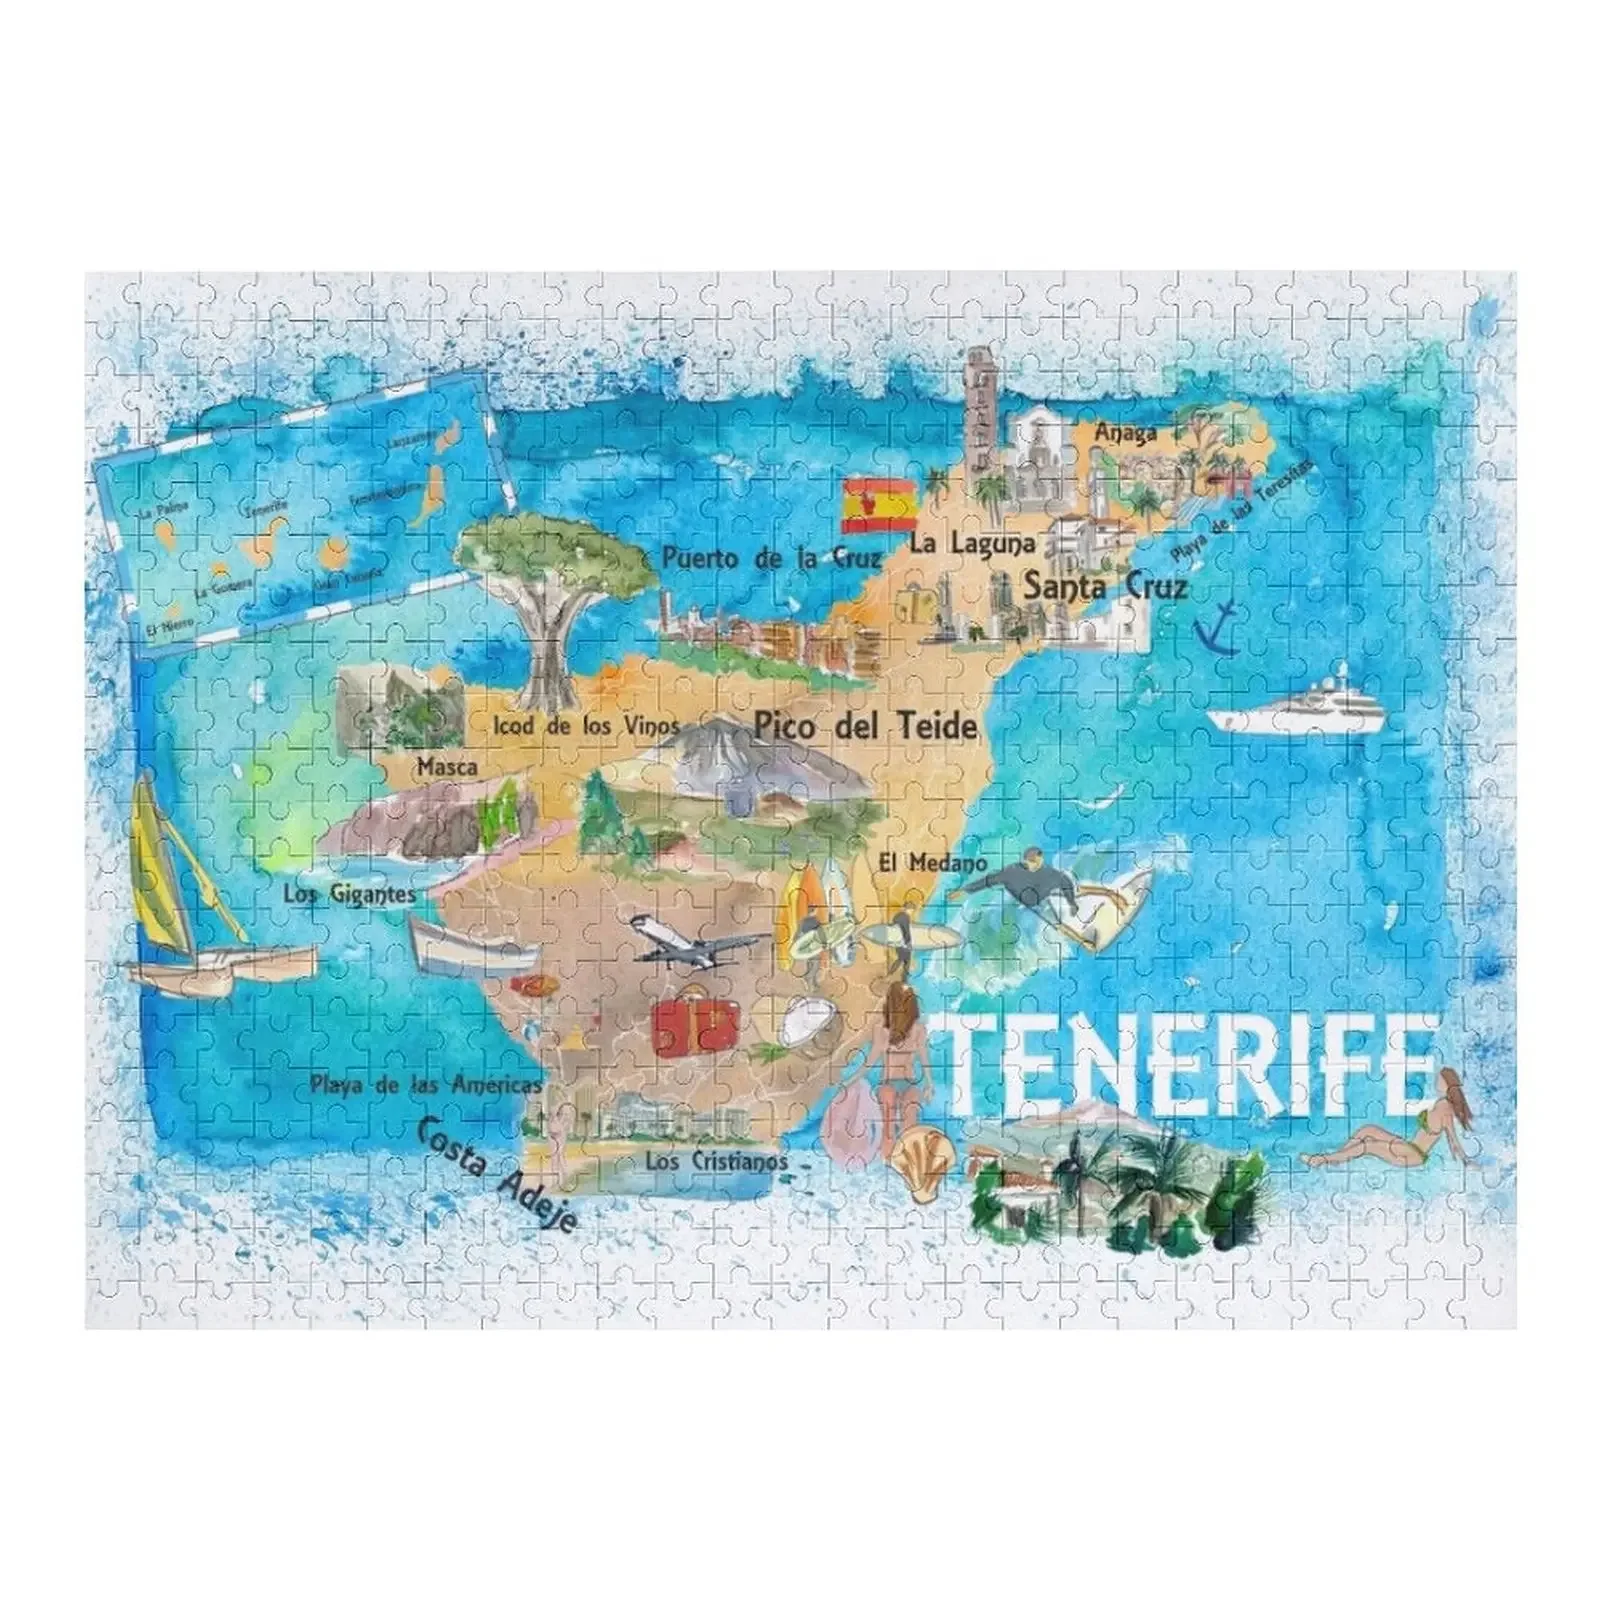 Tenerife Canarias Spain Illustrated Map with Landmarks and Highlights Jigsaw Puzzle Wooden Adults Personalized Name Puzzle